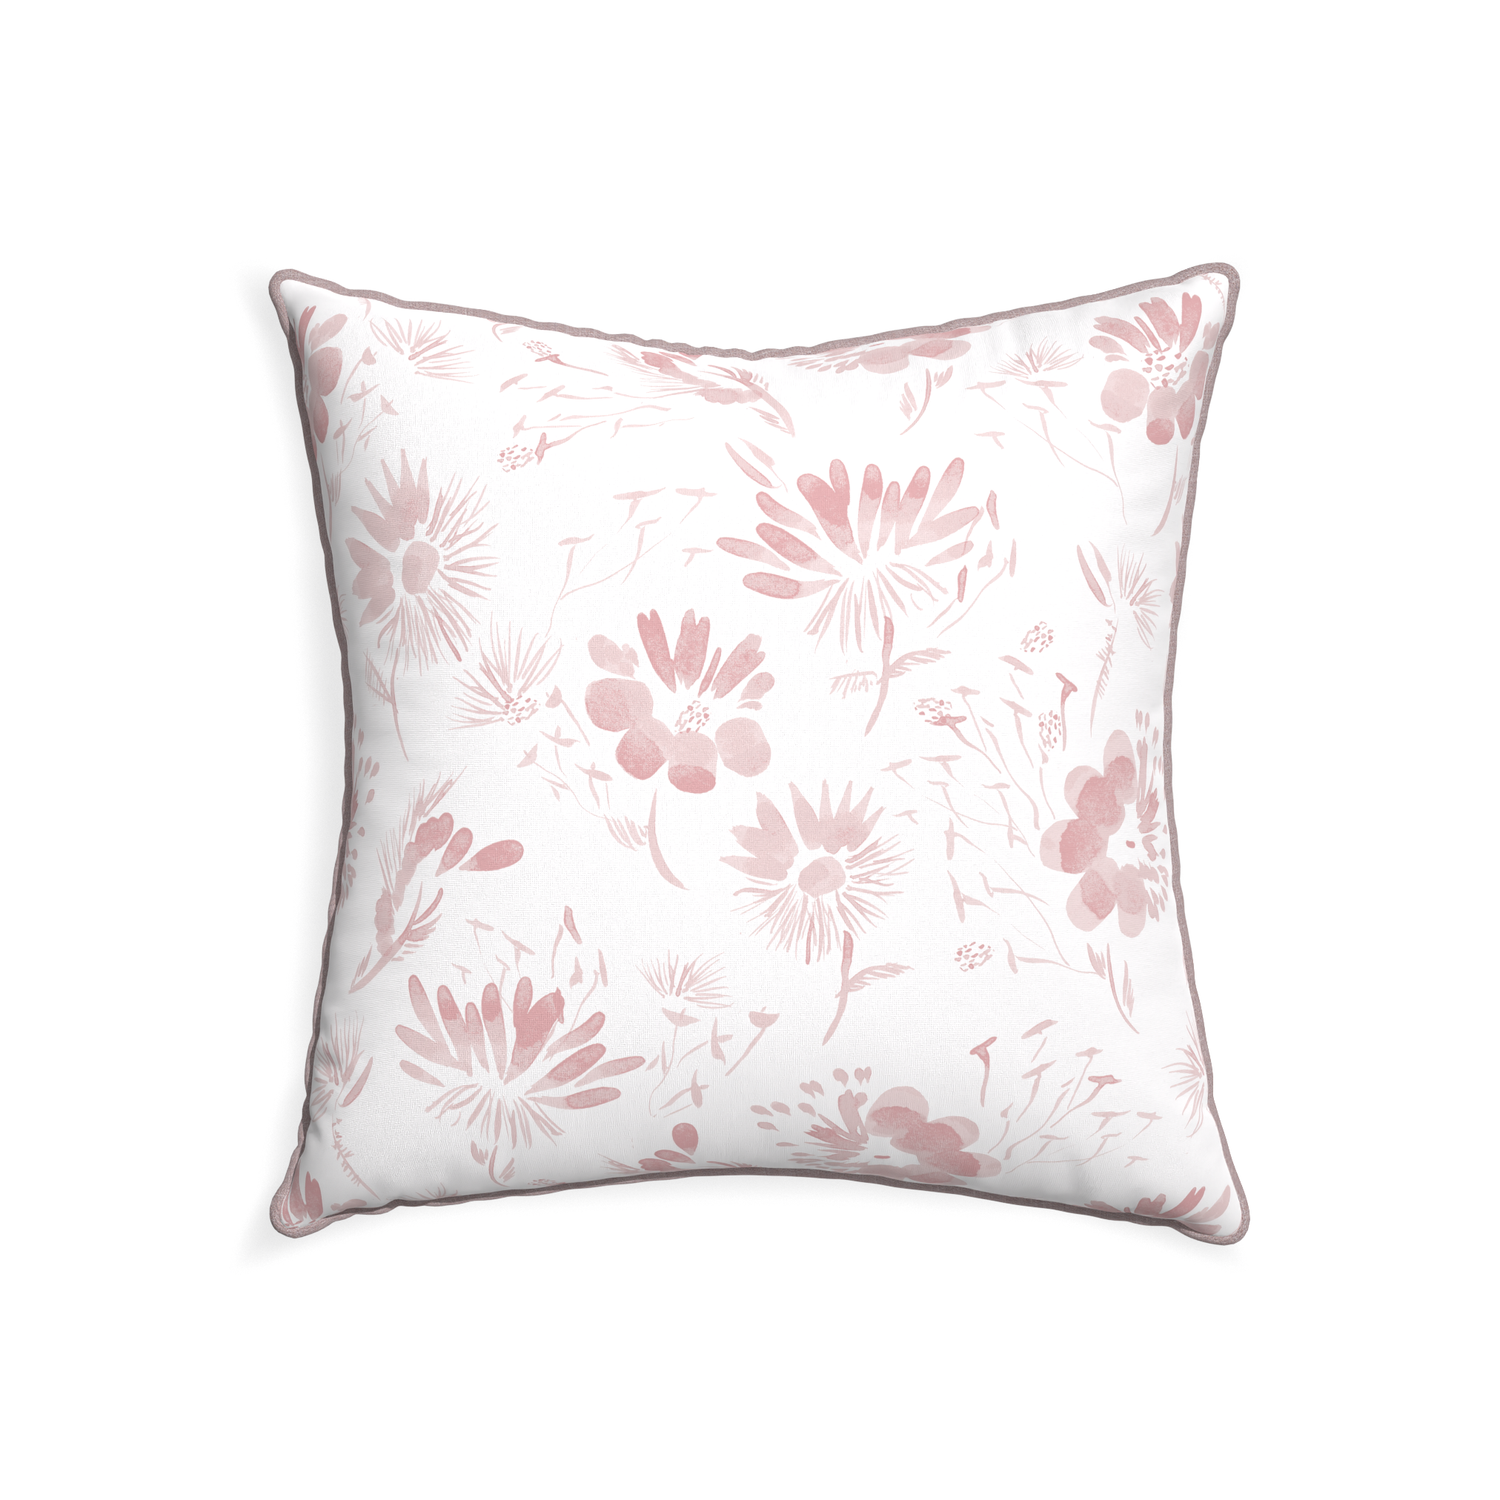 22-square blake custom pink floralpillow with orchid piping on white background